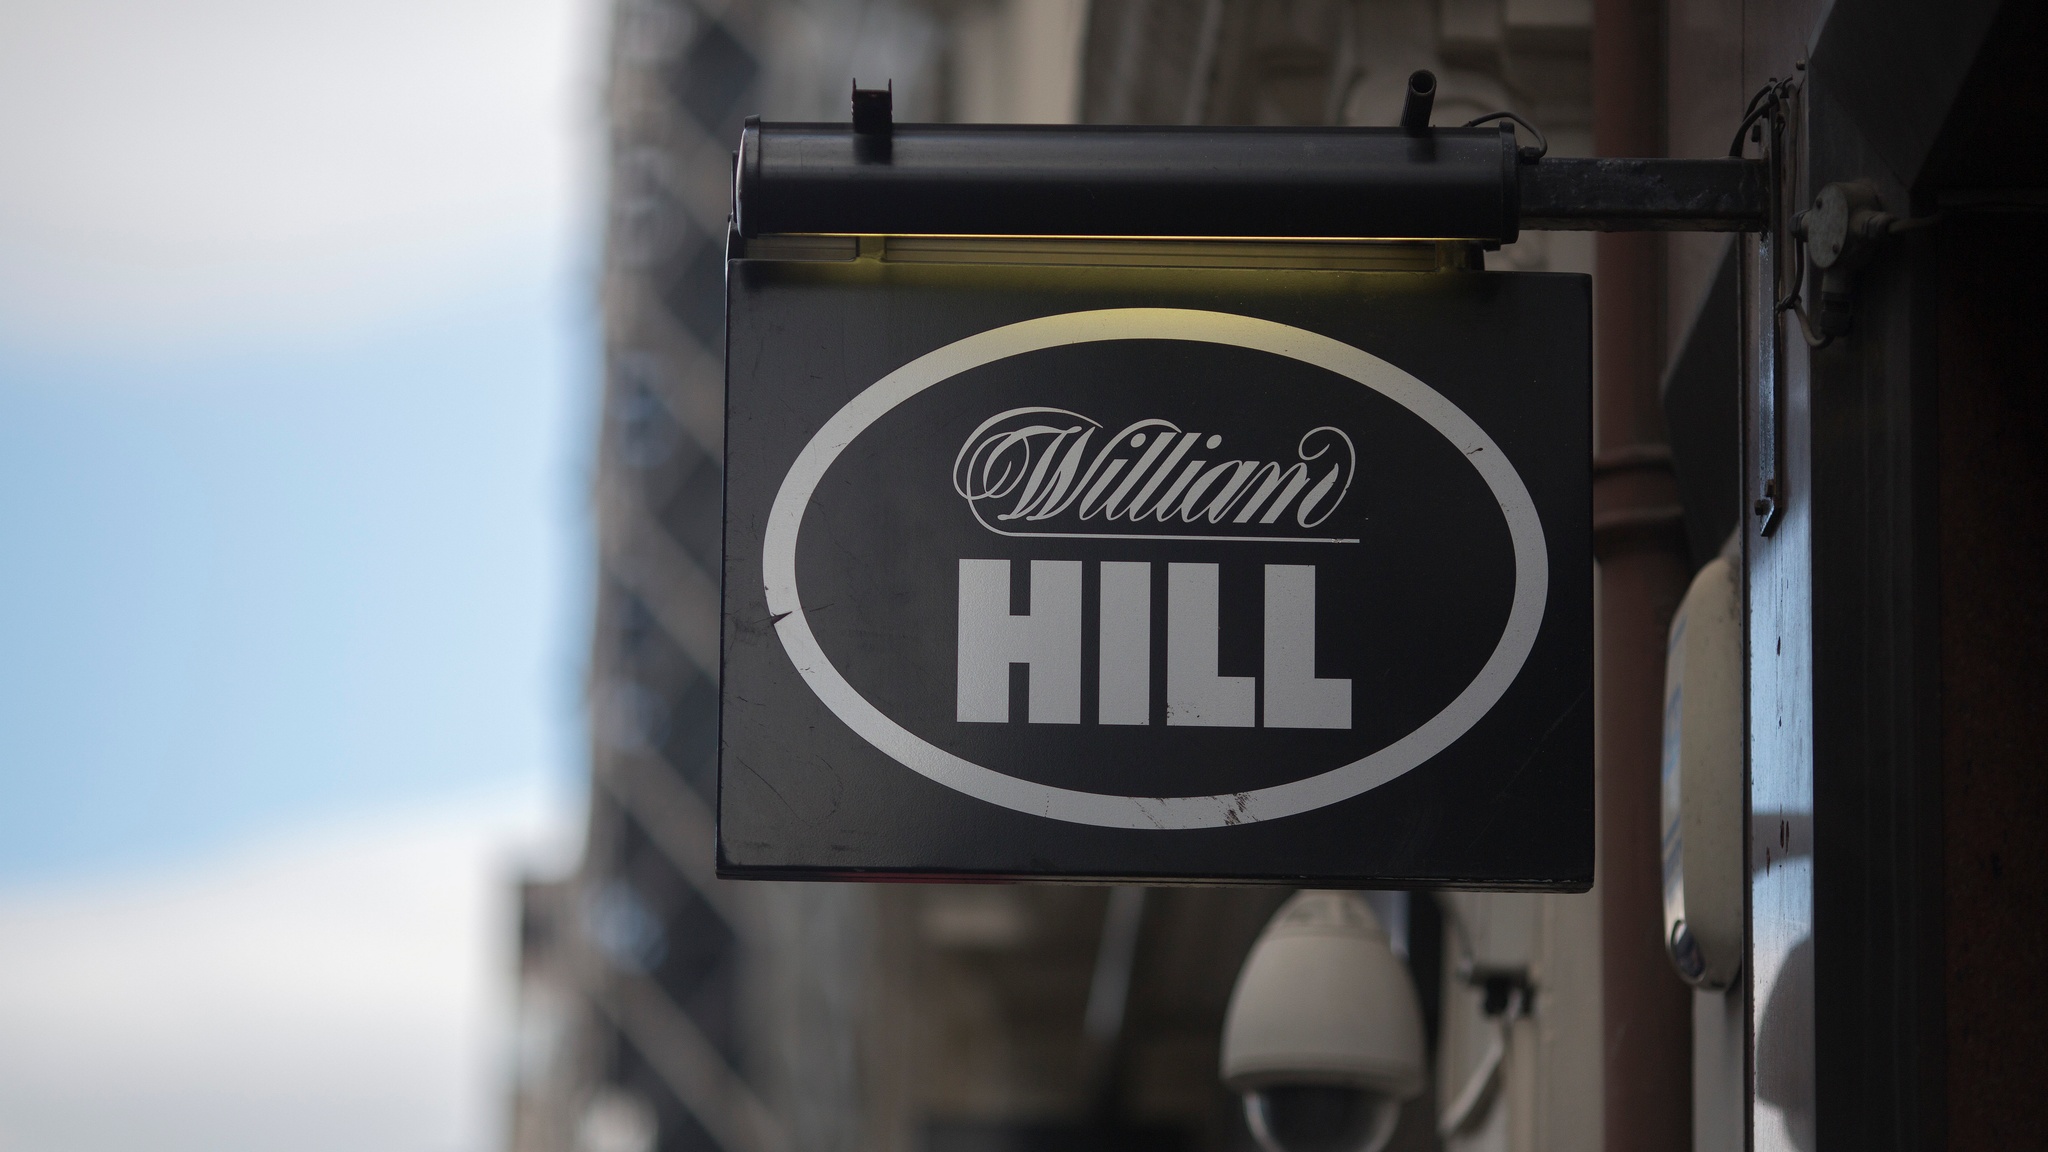 William Hill Will Close 119 Betting Shops Due to Reducing Profits